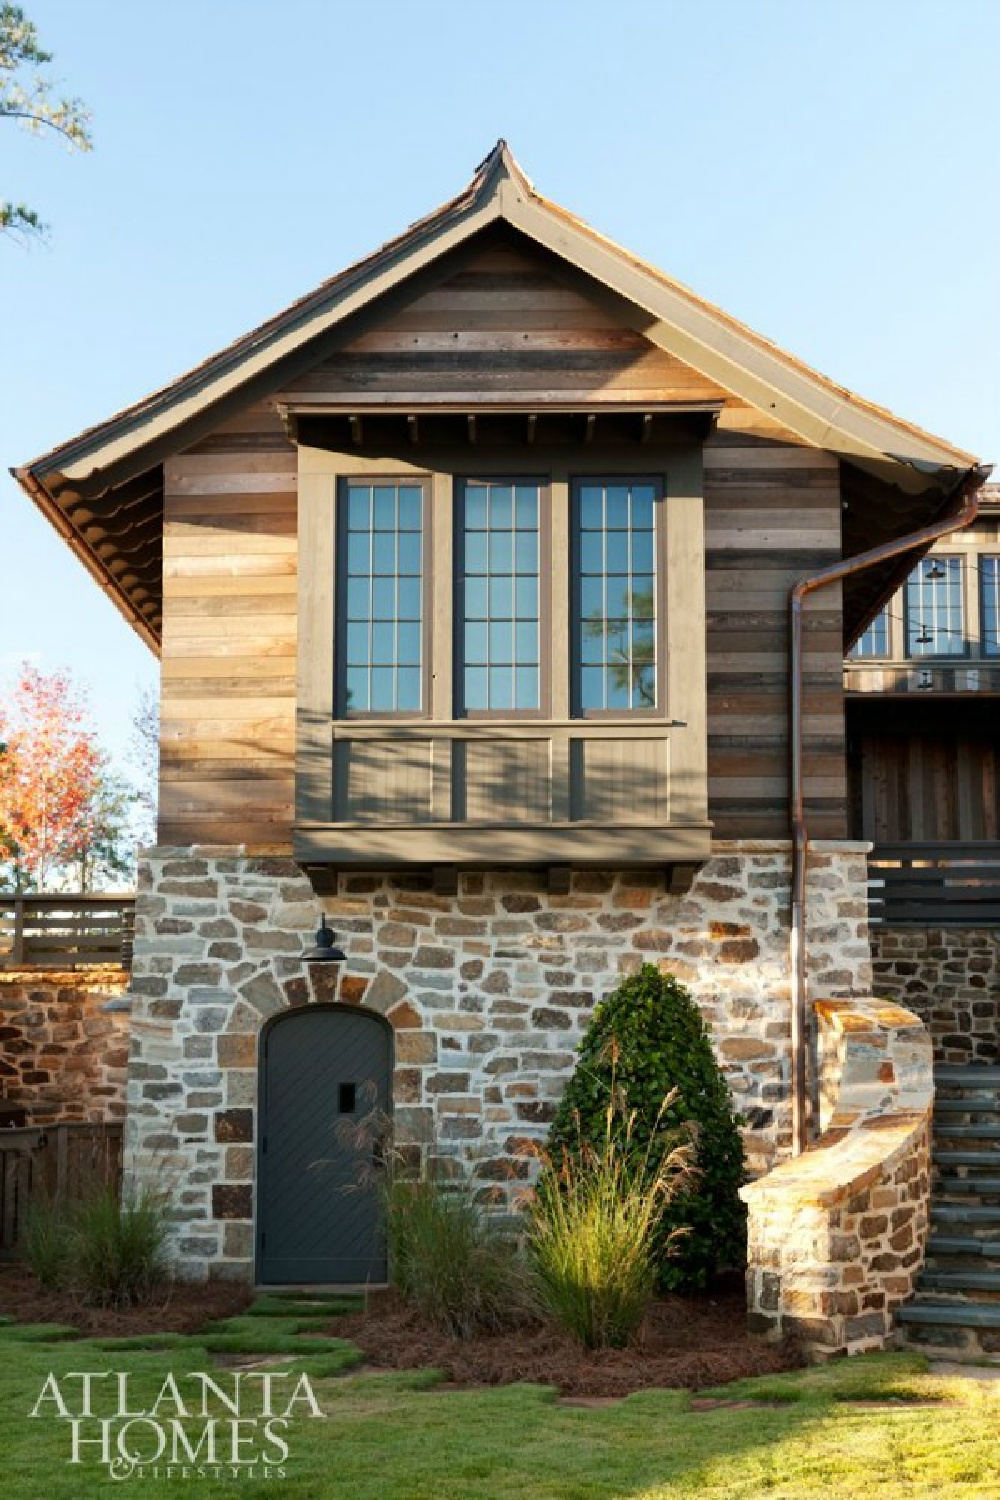 Timeless architecture and design by Atlanta-based Jeffrey Dungan who mixes rustic with elegant in luxury home design. #architecture #luxuryhome #jeffreydungan #timelessdesign #sophisticateddesign